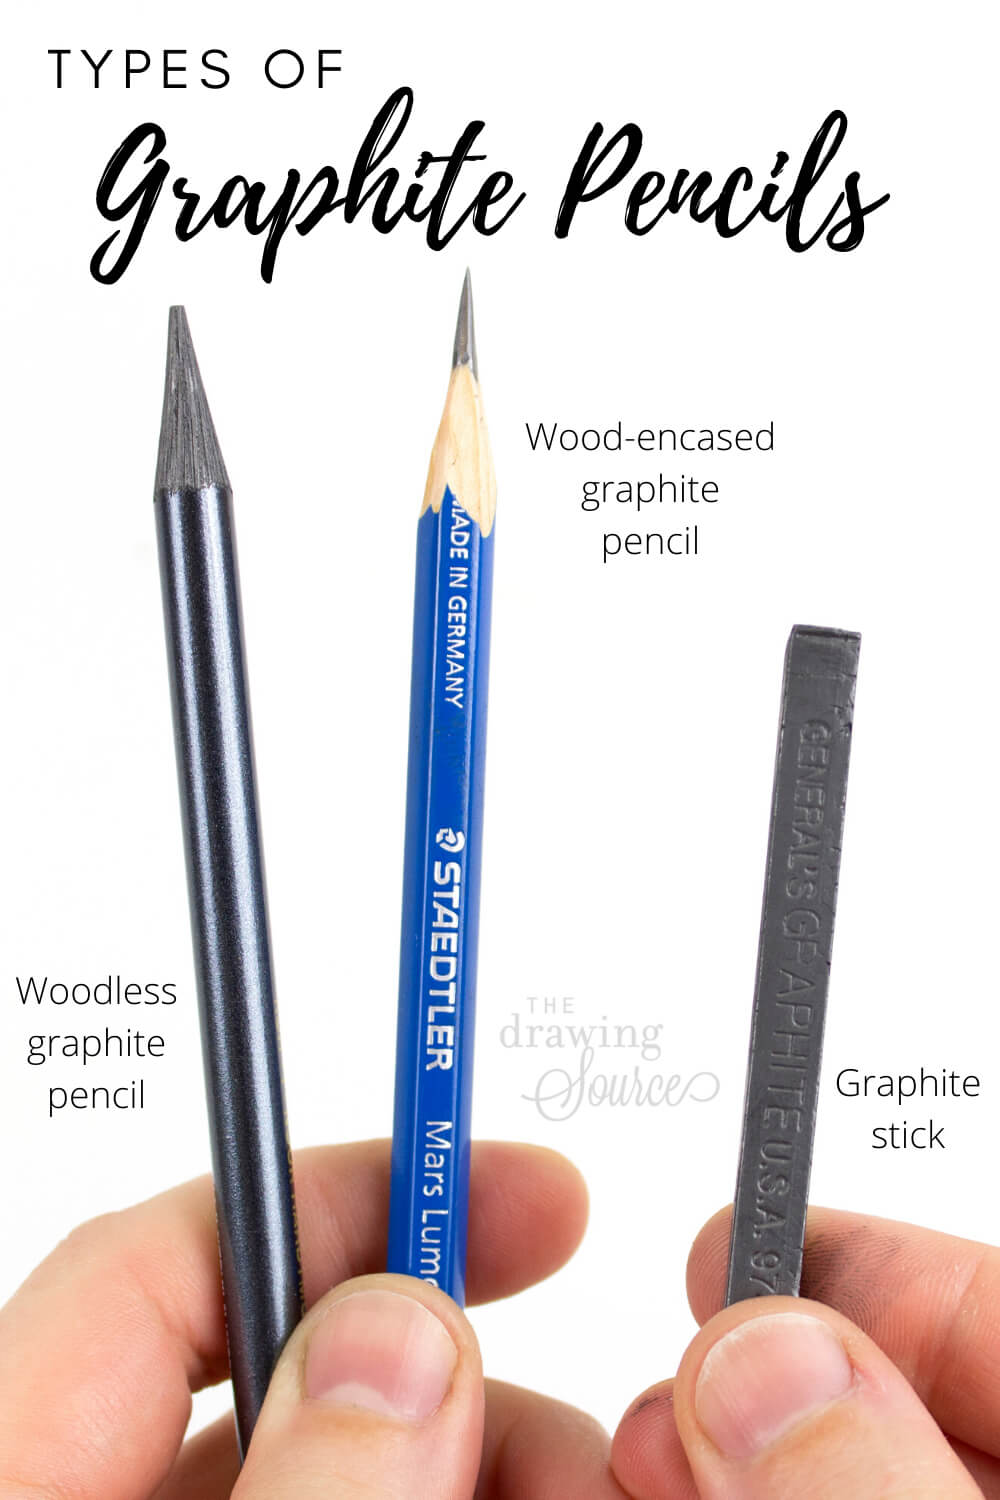 https://www.thedrawingsource.com/images/types-of-graphite-pencils-pin.jpg